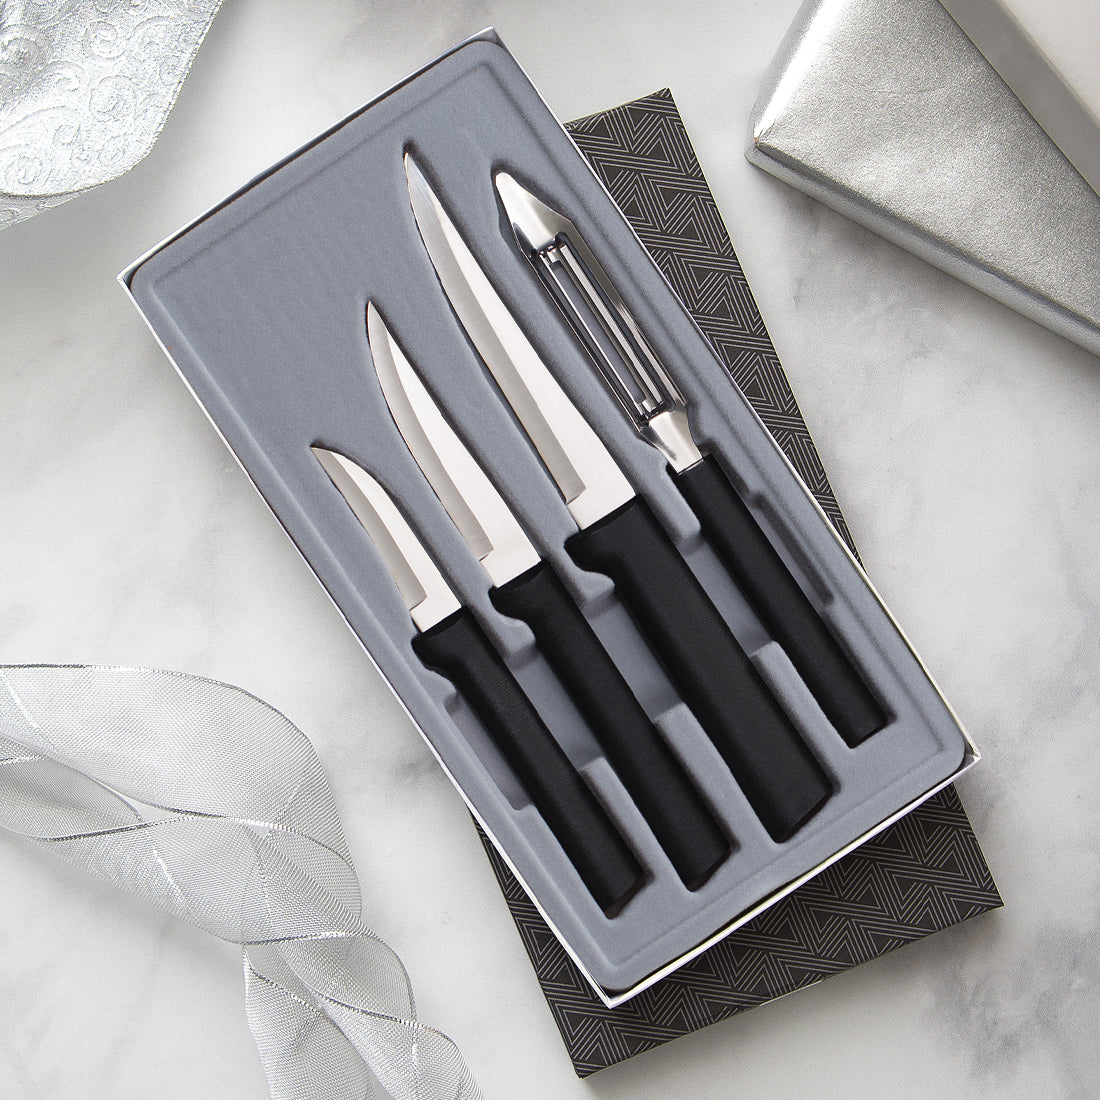 Rada Cutlery Knife 7 Stainless Steel Kitchen Knives Starter Gift Set with  Brushed Aluminum Made in USA, Silver Handle